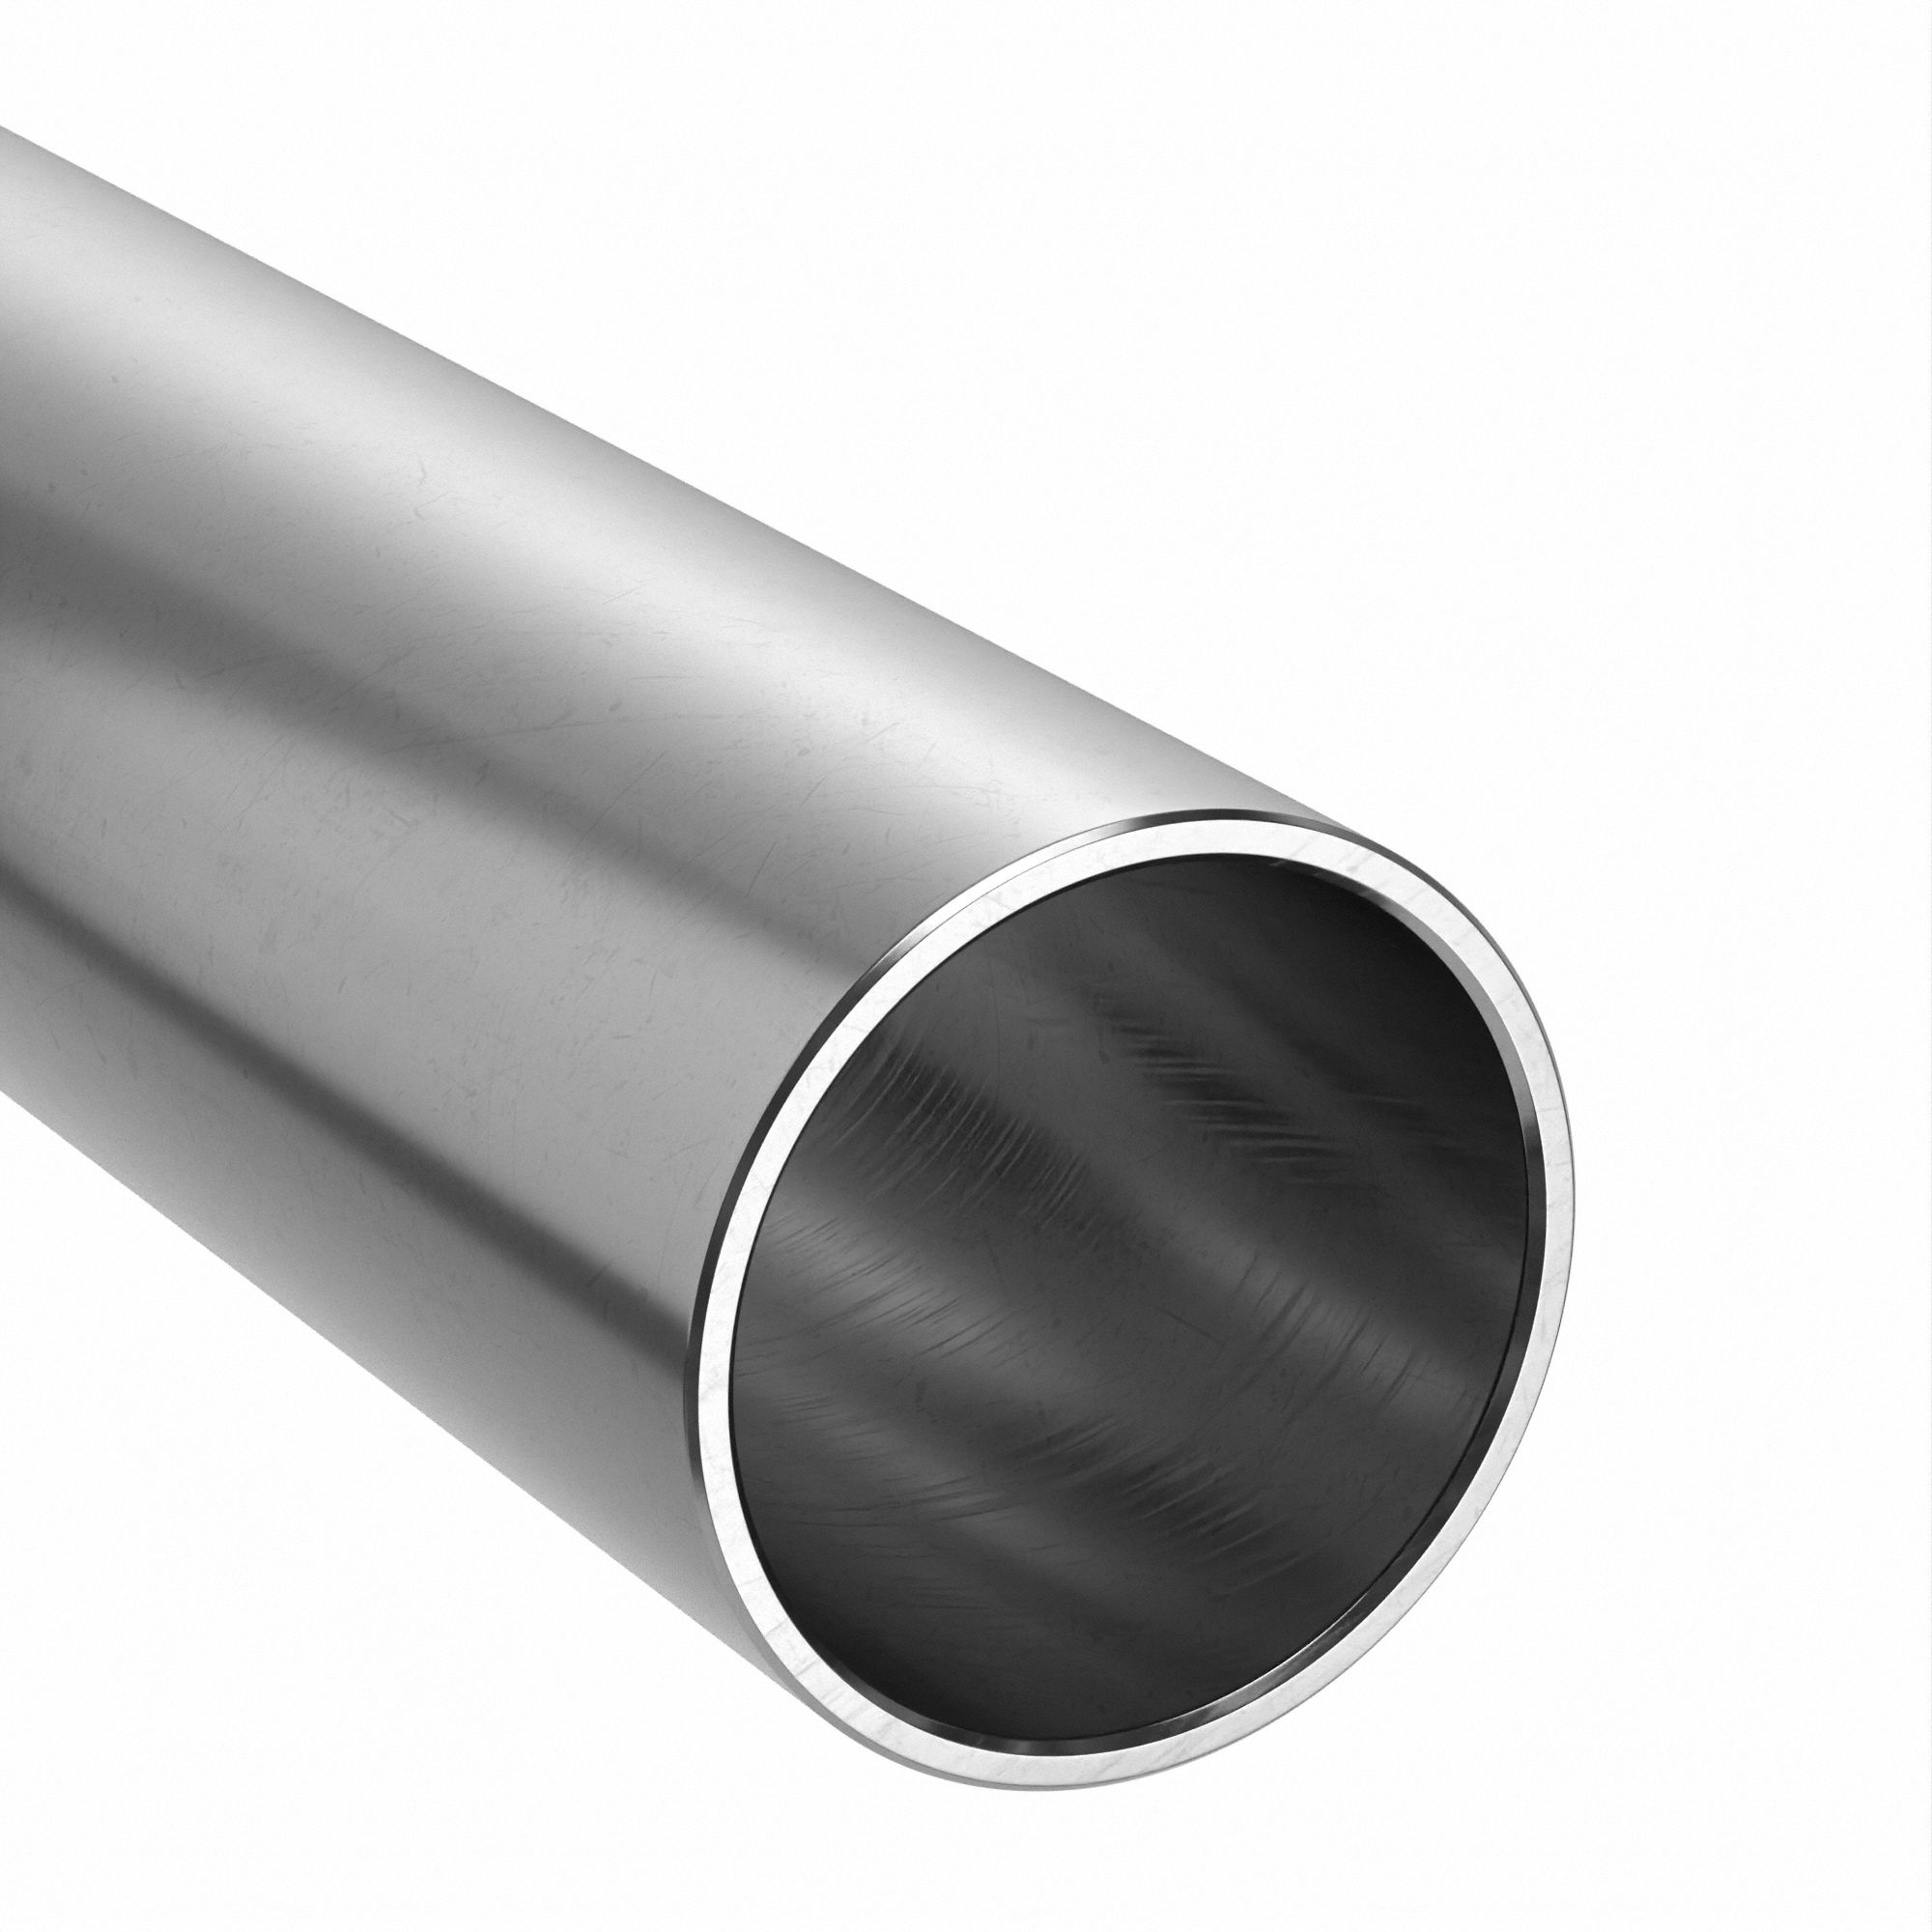 Stainless Steel Round Tube / Pipe - VARIOUS SIZES 4MM - 42MM - 316 GRADE